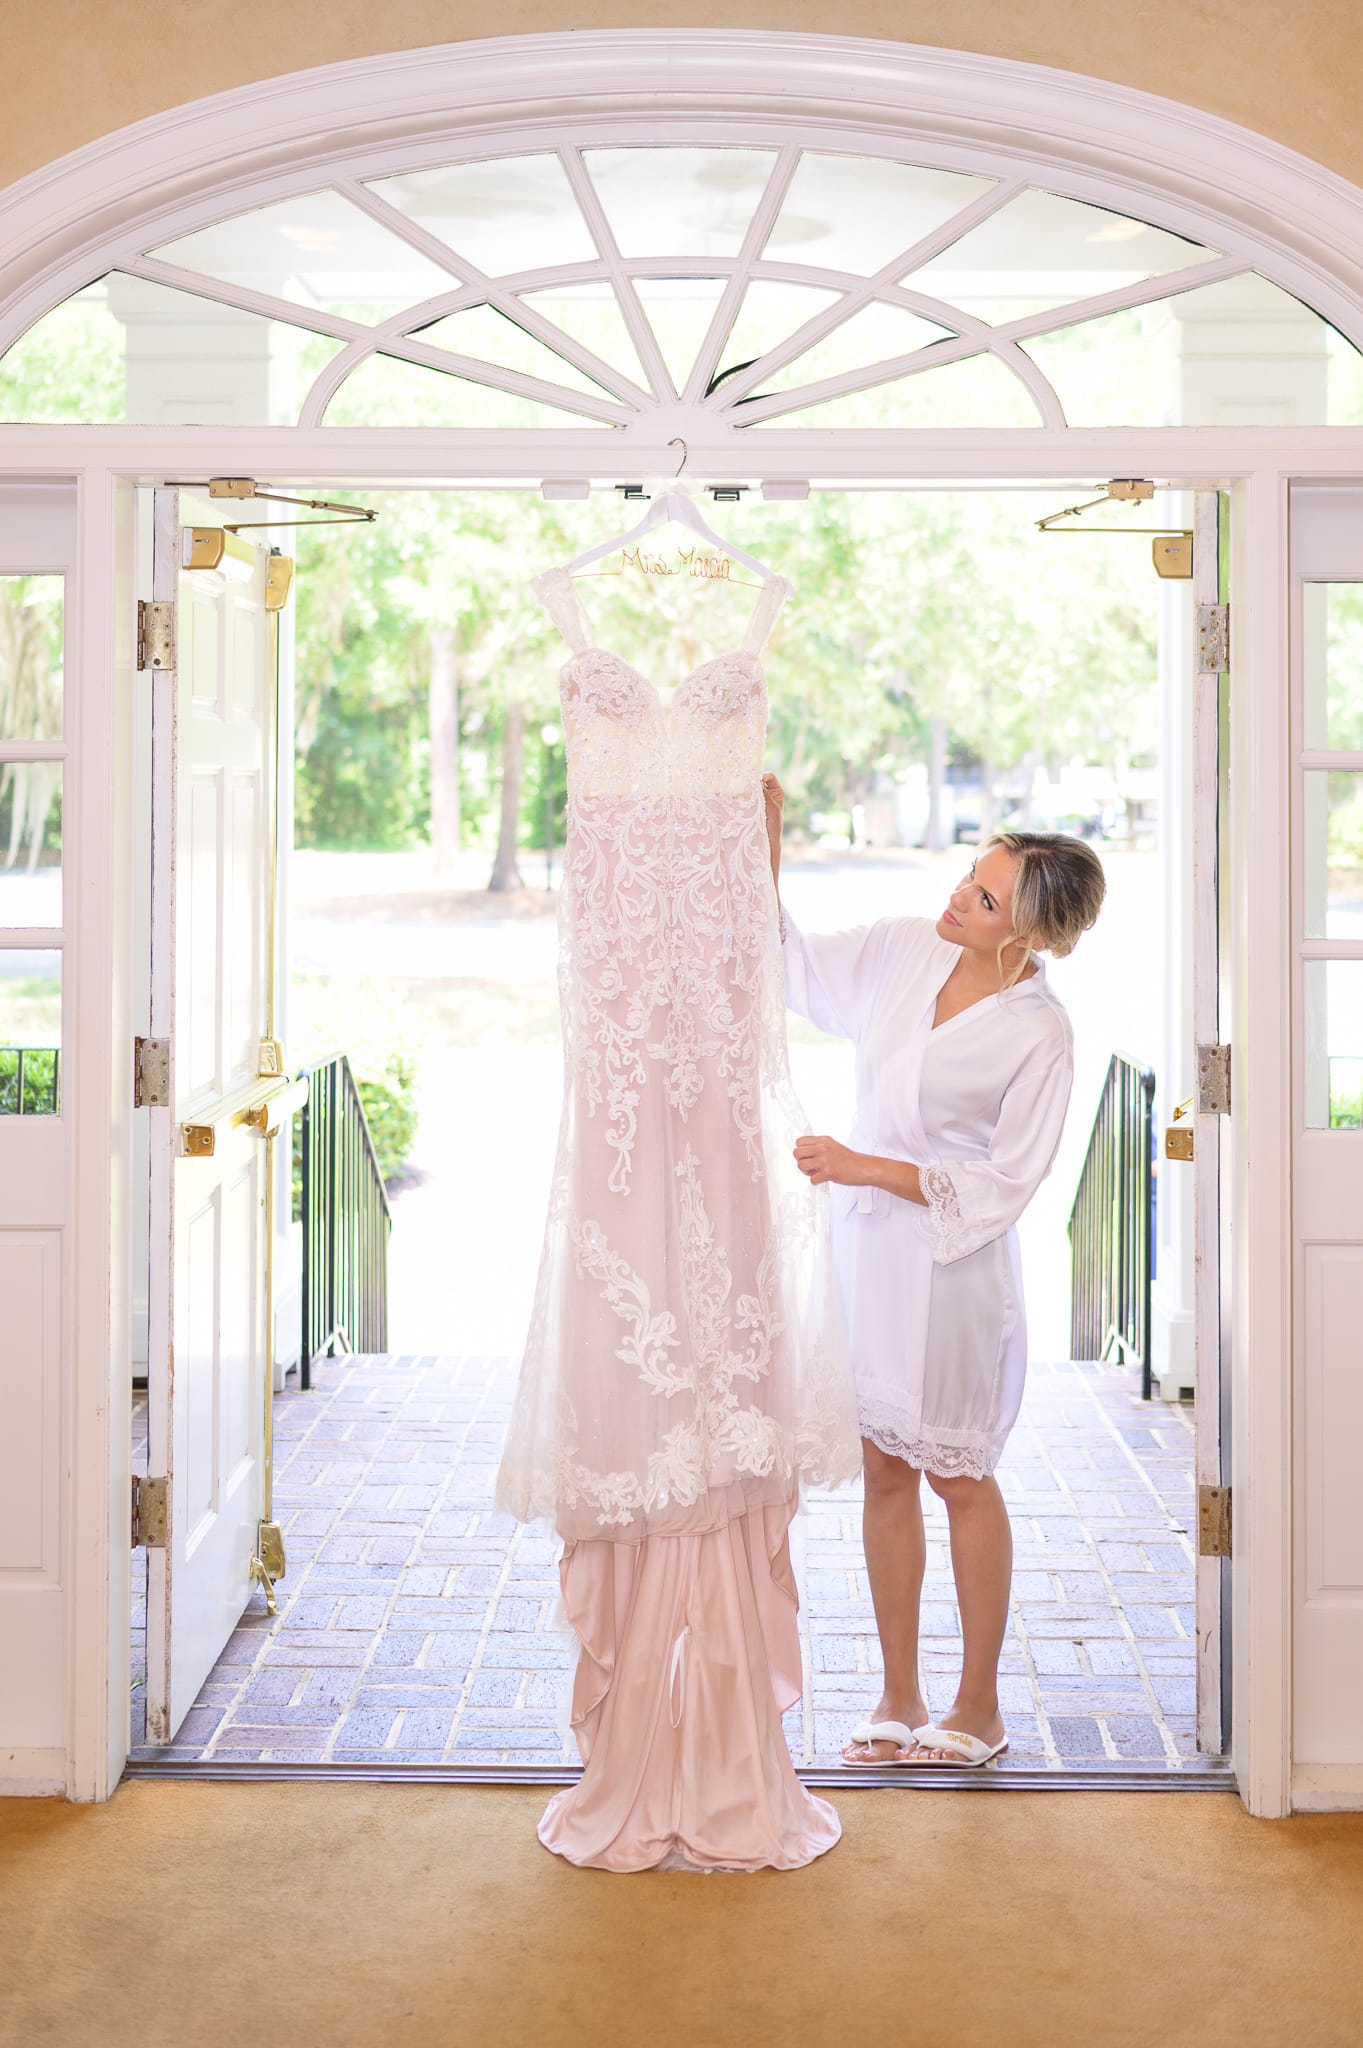 Bride looking at dress hanging in the doorway - Pawleys Plantation Golf & Country Club